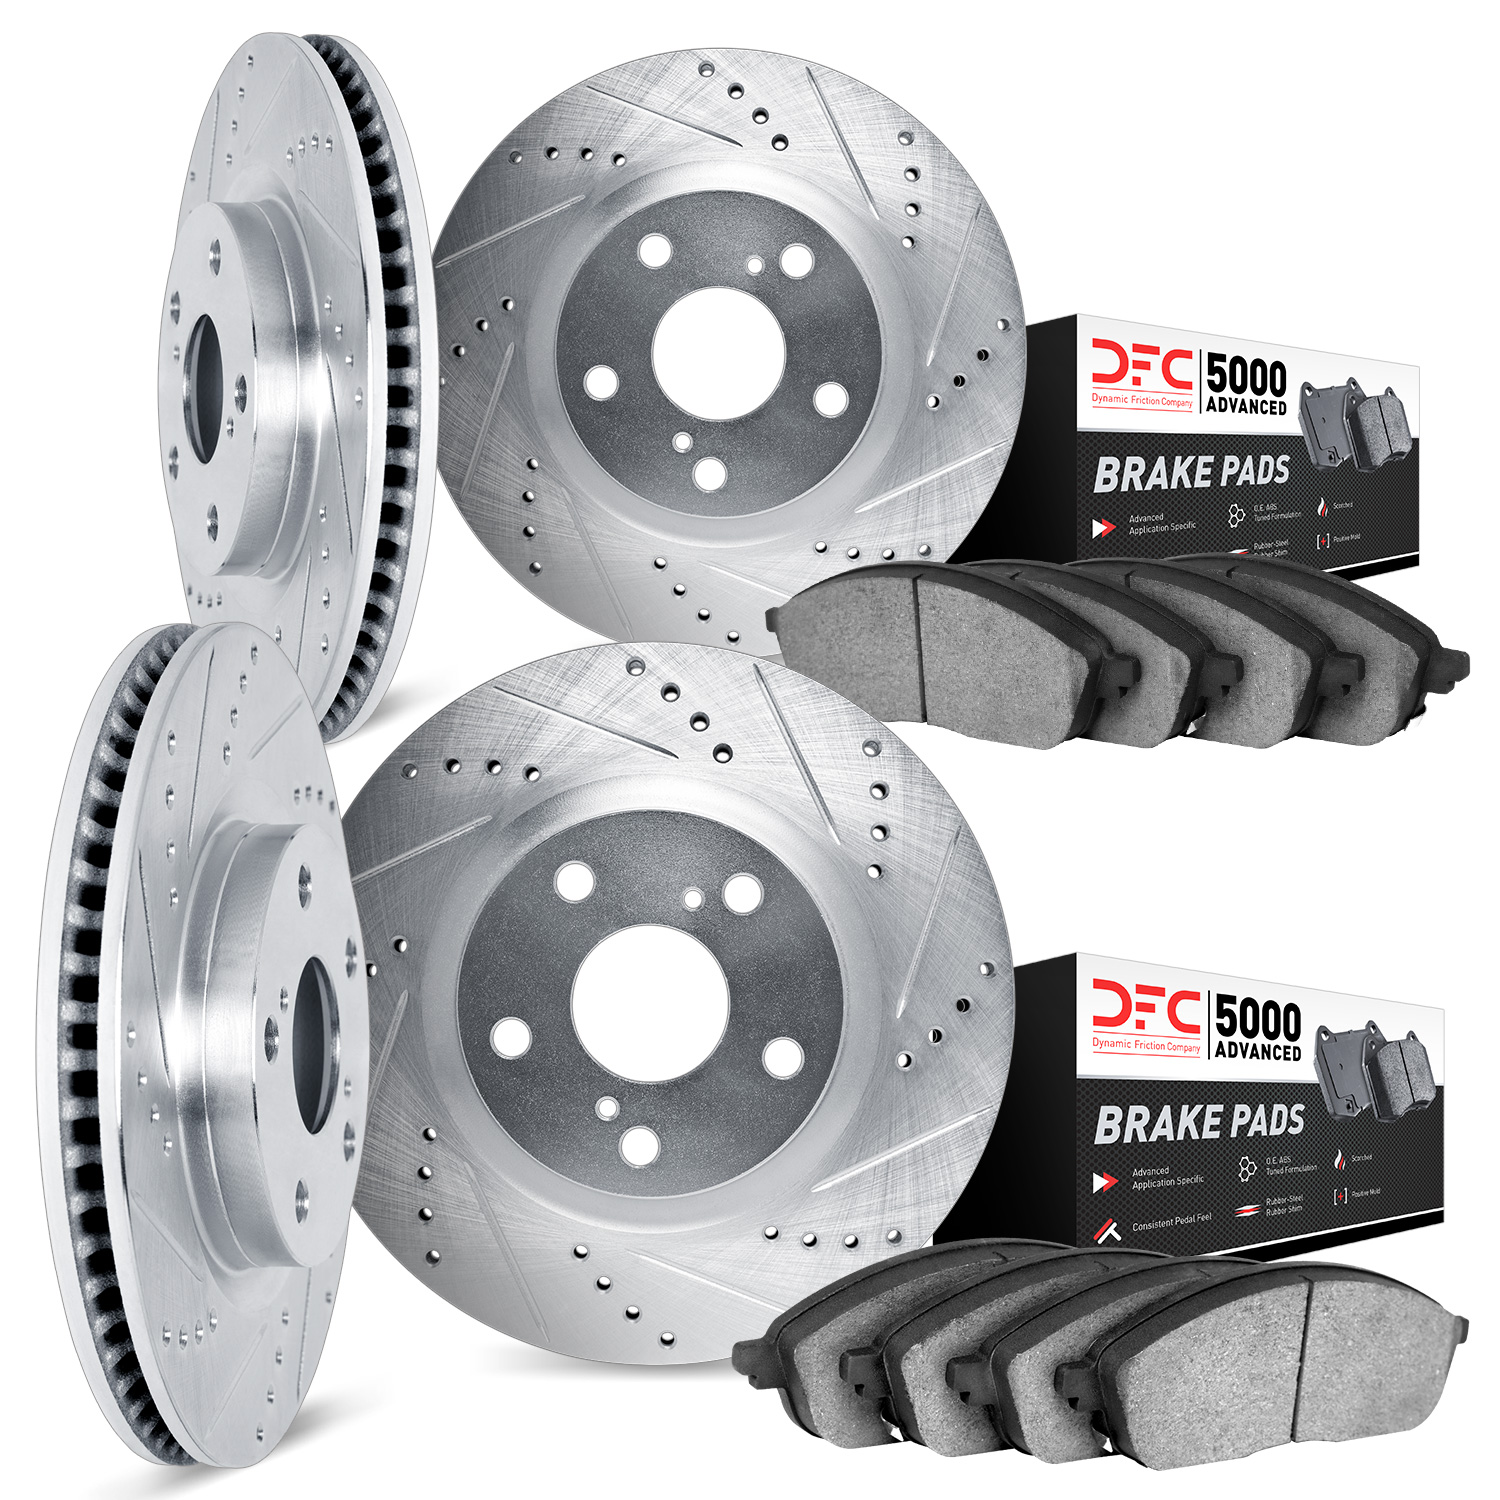 7504-68007 Drilled/Slotted Brake Rotors w/5000 Advanced Brake Pads Kit [Silver], 2008-2020 Infiniti/Nissan, Position: Front and